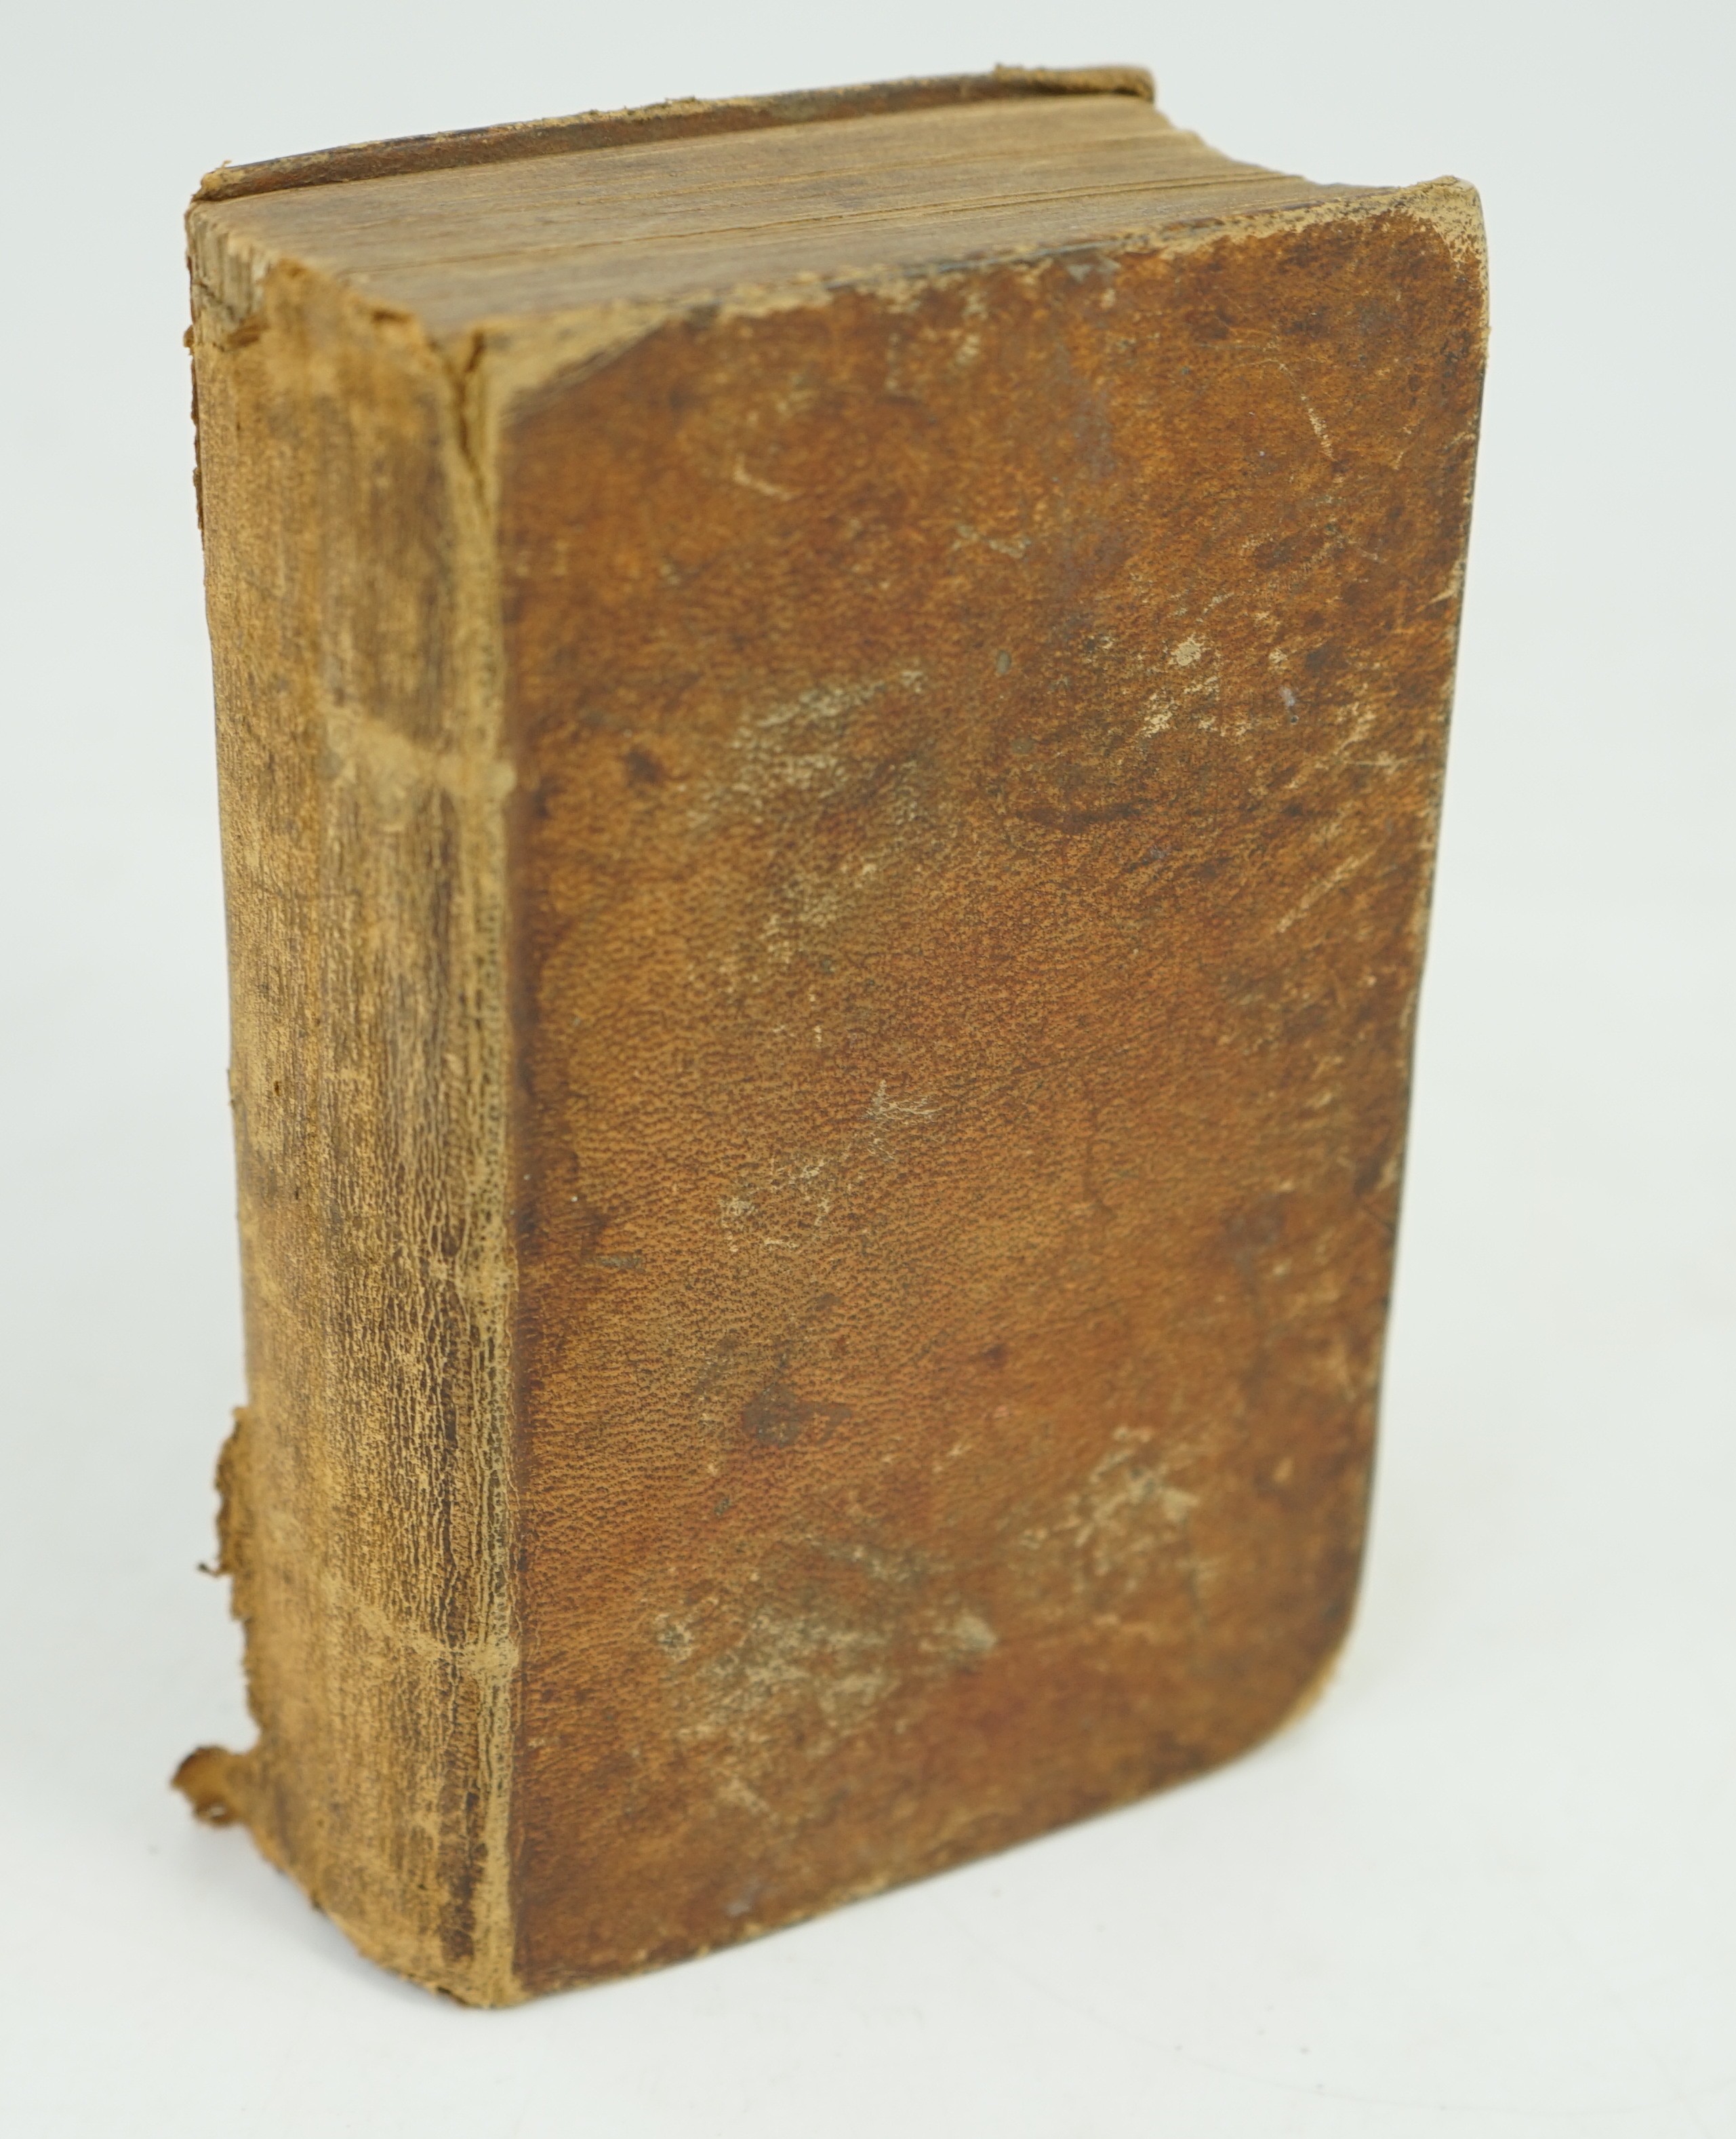 Oliver & Boyd's New Edinburgh Almanac and National Repository for the Year 1844 ... bound with: Morison's Perth and Perthshire Register, for 1844 ... also the Tay Shipping Lists. contemp. calf. Edinburgh & Perth, (1843)